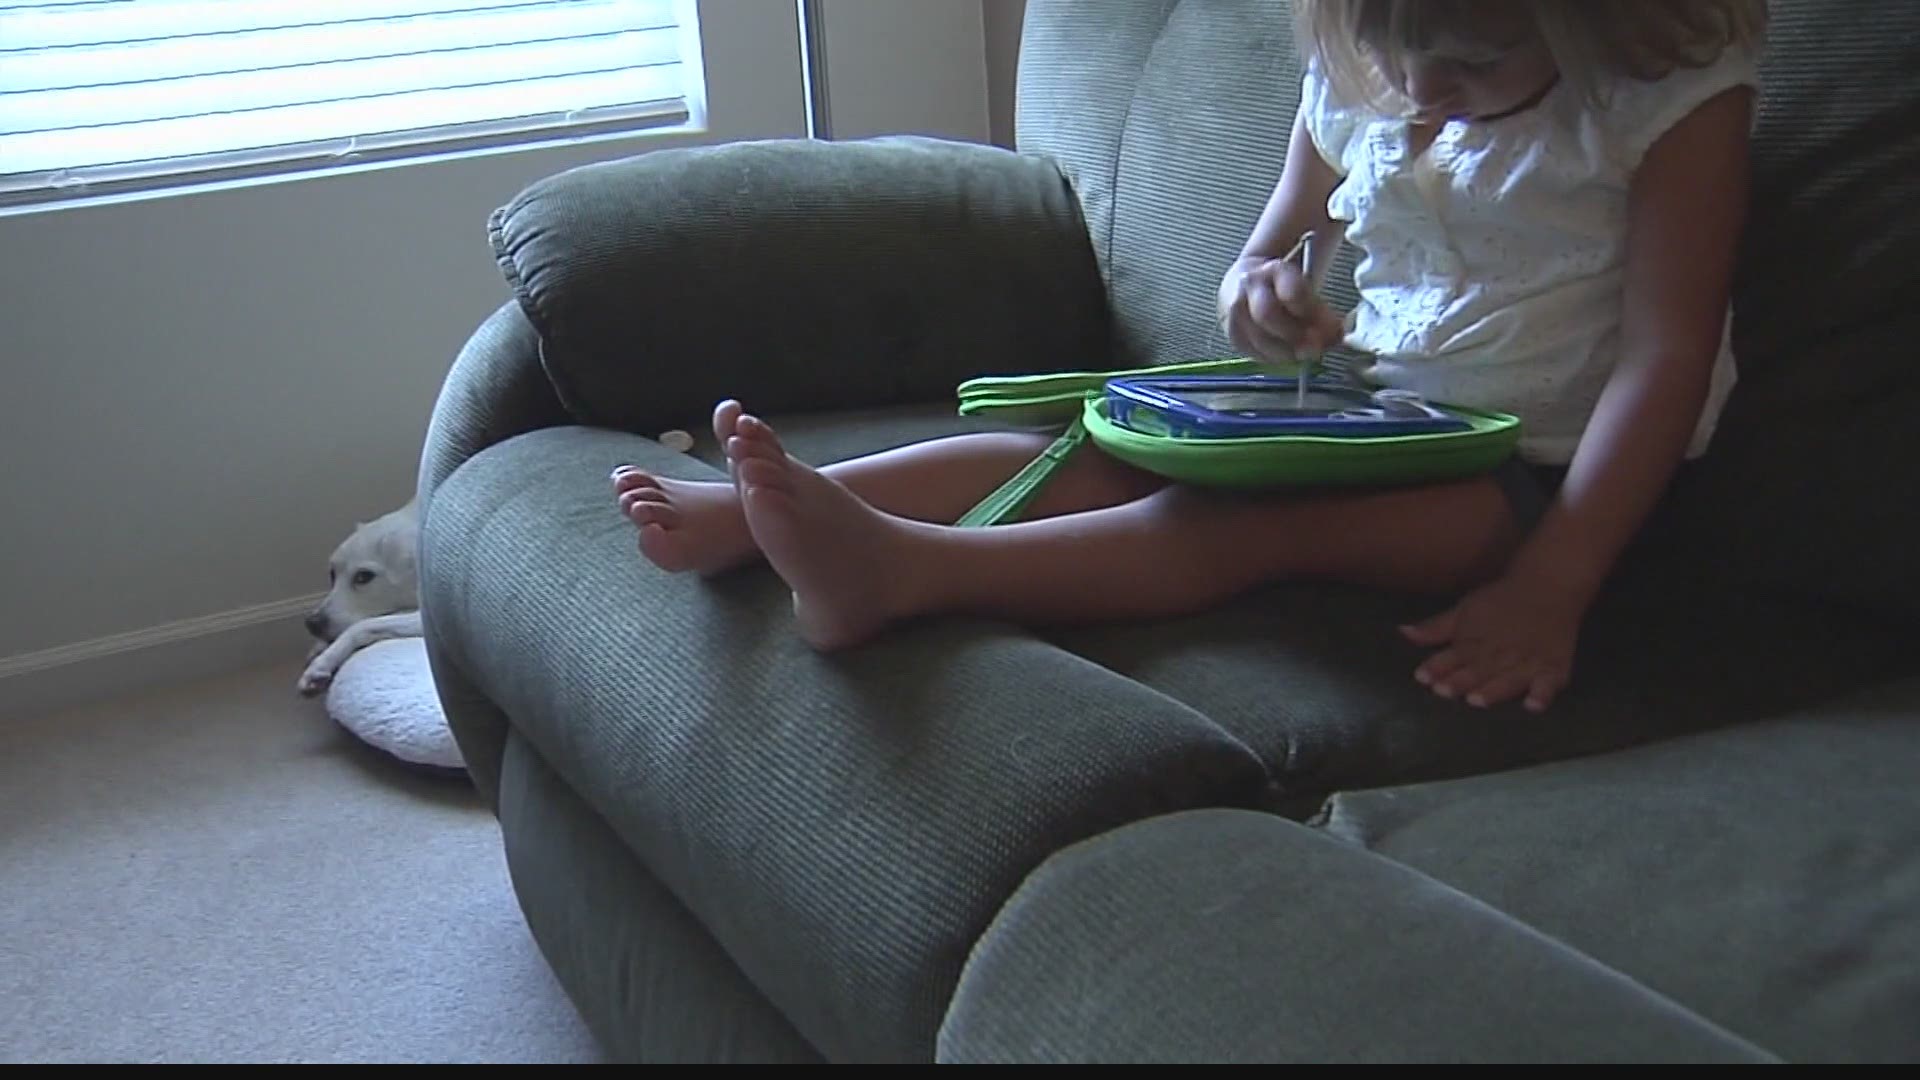 Too much summer screen time can be unhealthy for kids, and 13News Education Expert Jennifer Brinker says parents need to set limits.